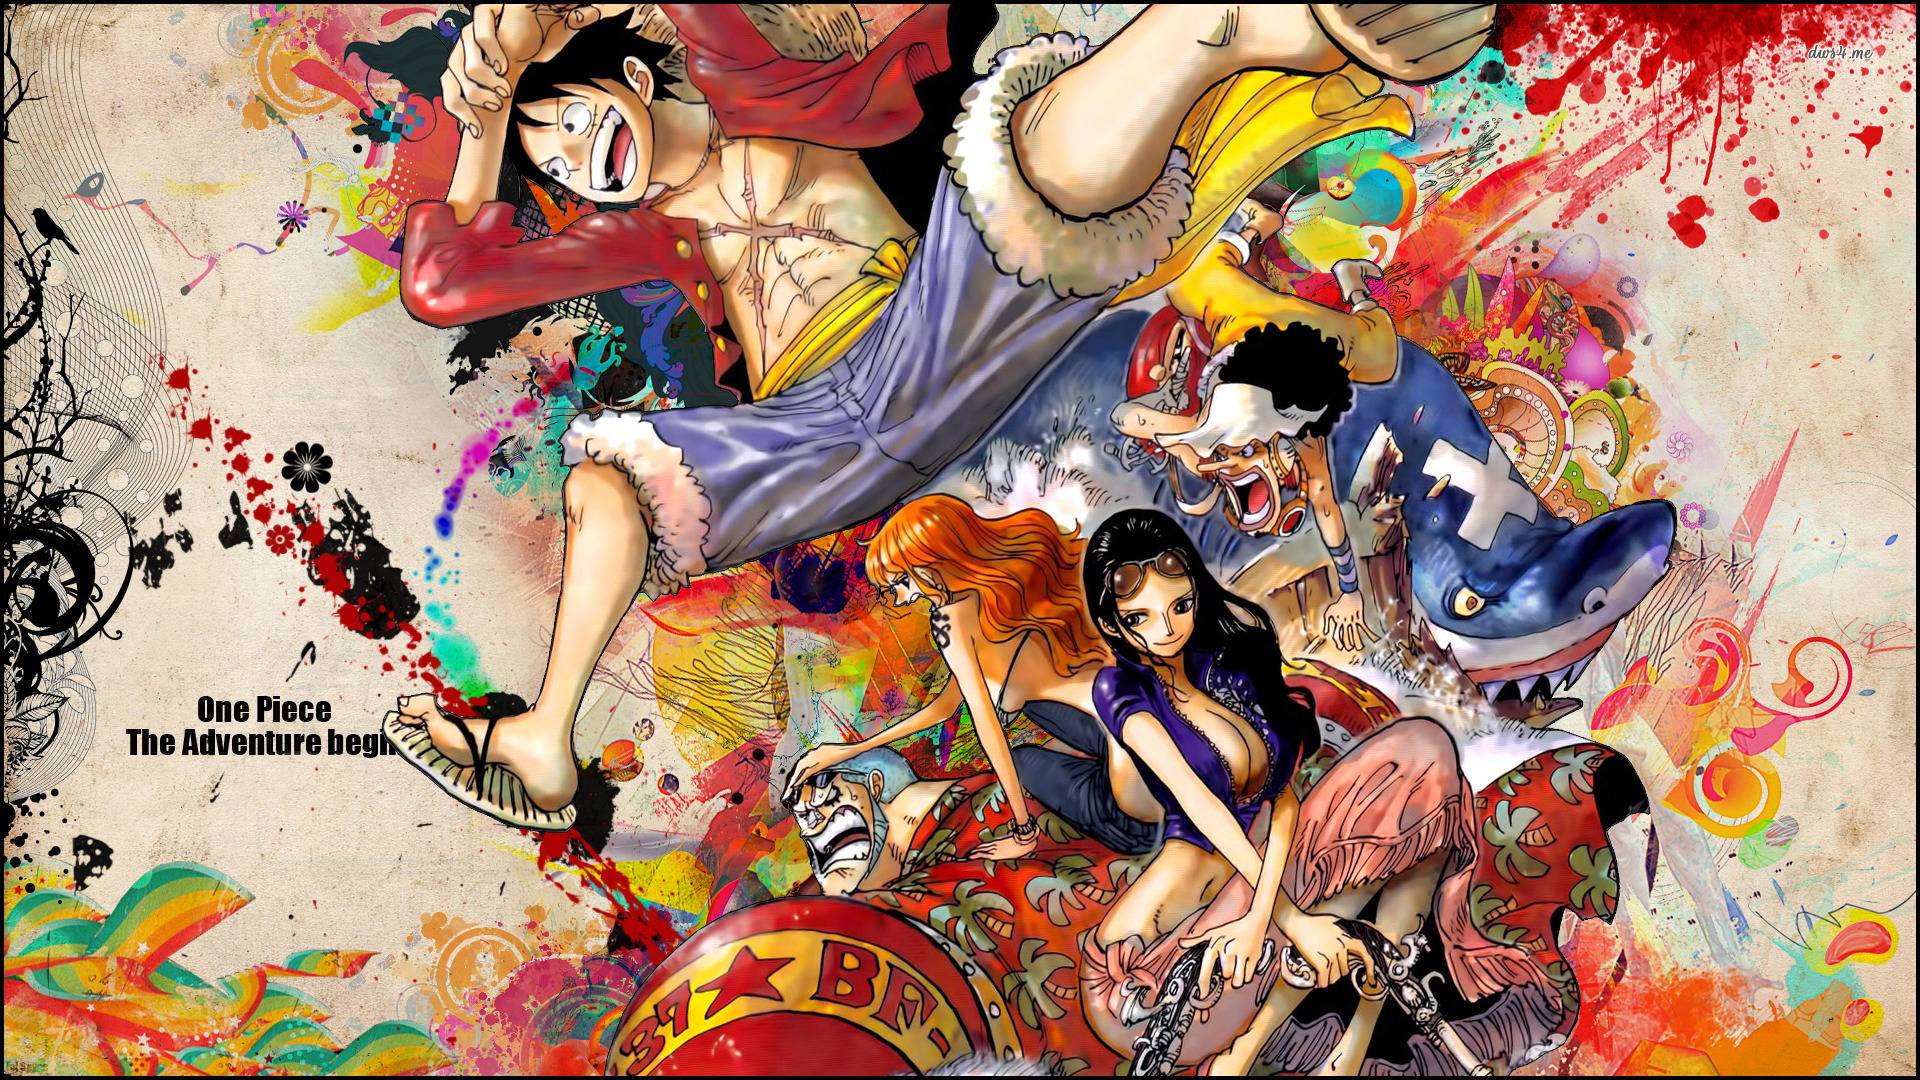 Anime One Piece Wallpaper Wide. Download High Quality Resolution